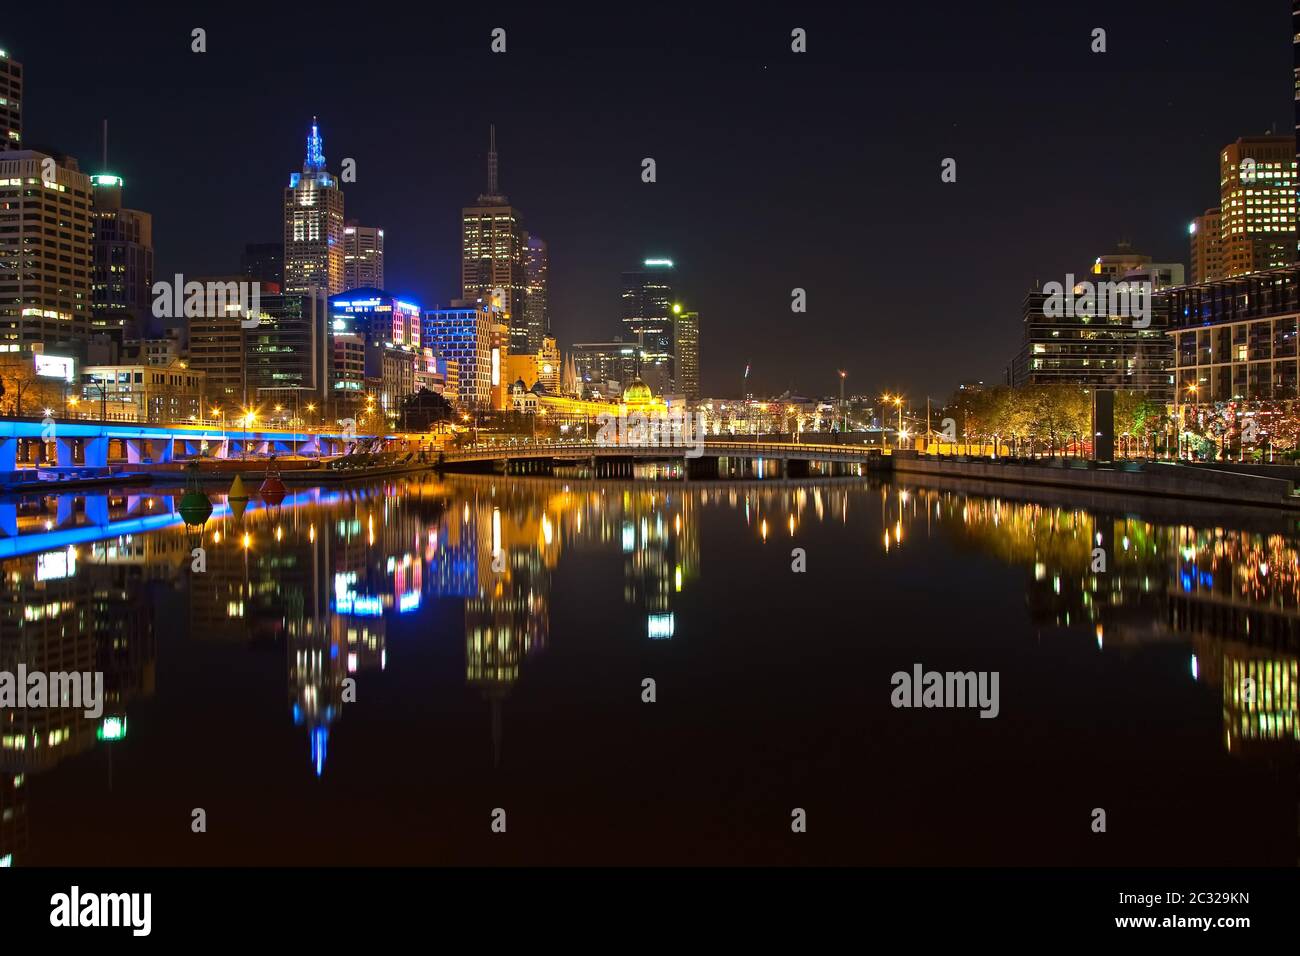 Melbourne at night Stock Photo